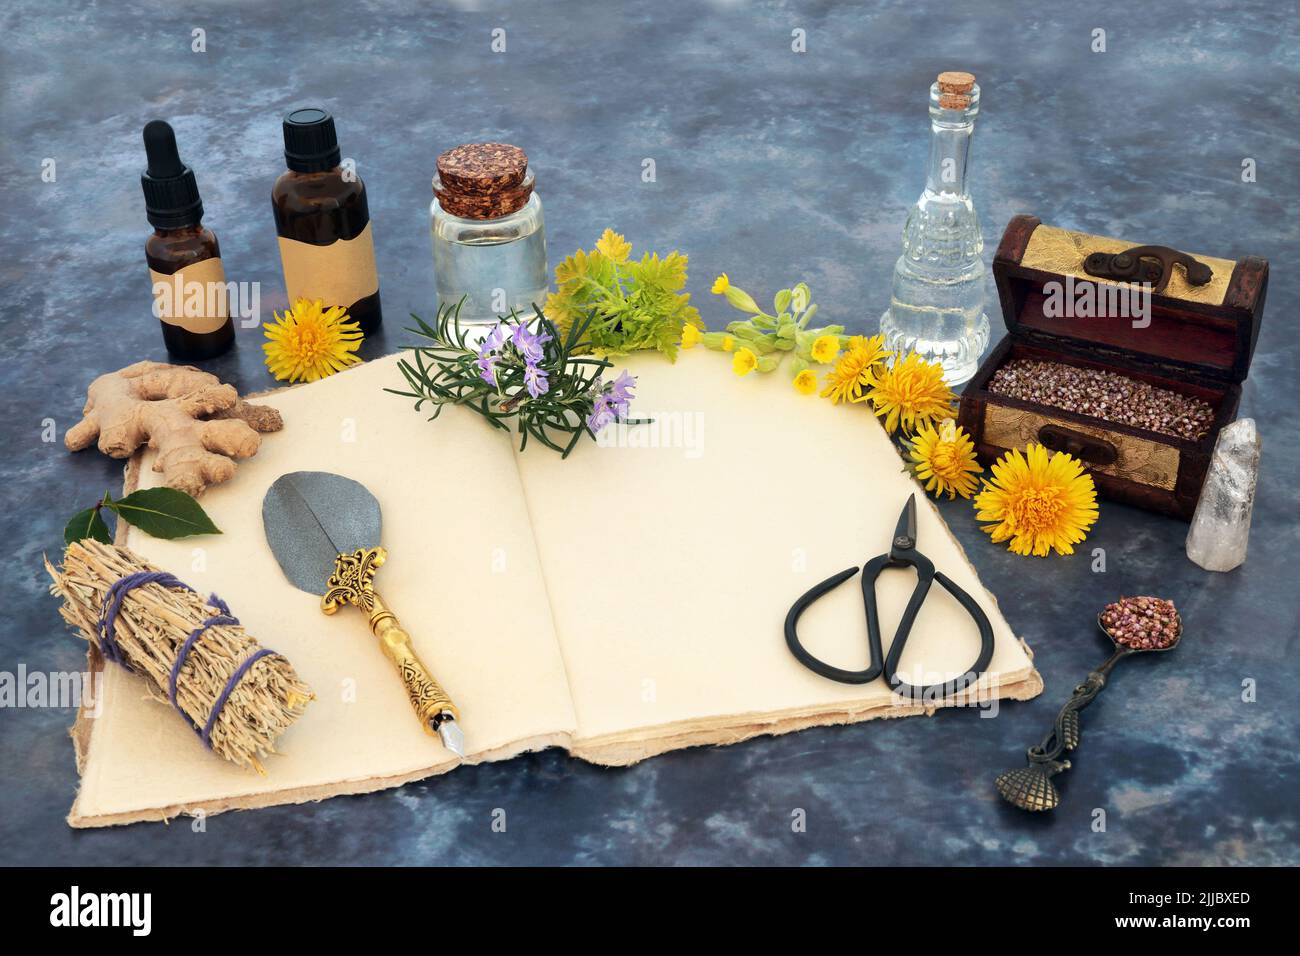 Pagan natural healing cleansing herbal plant medicine. Herbs and flowers for alternative naturopathic remedies. Purifying sage smudge stick, notebook, Stock Photo